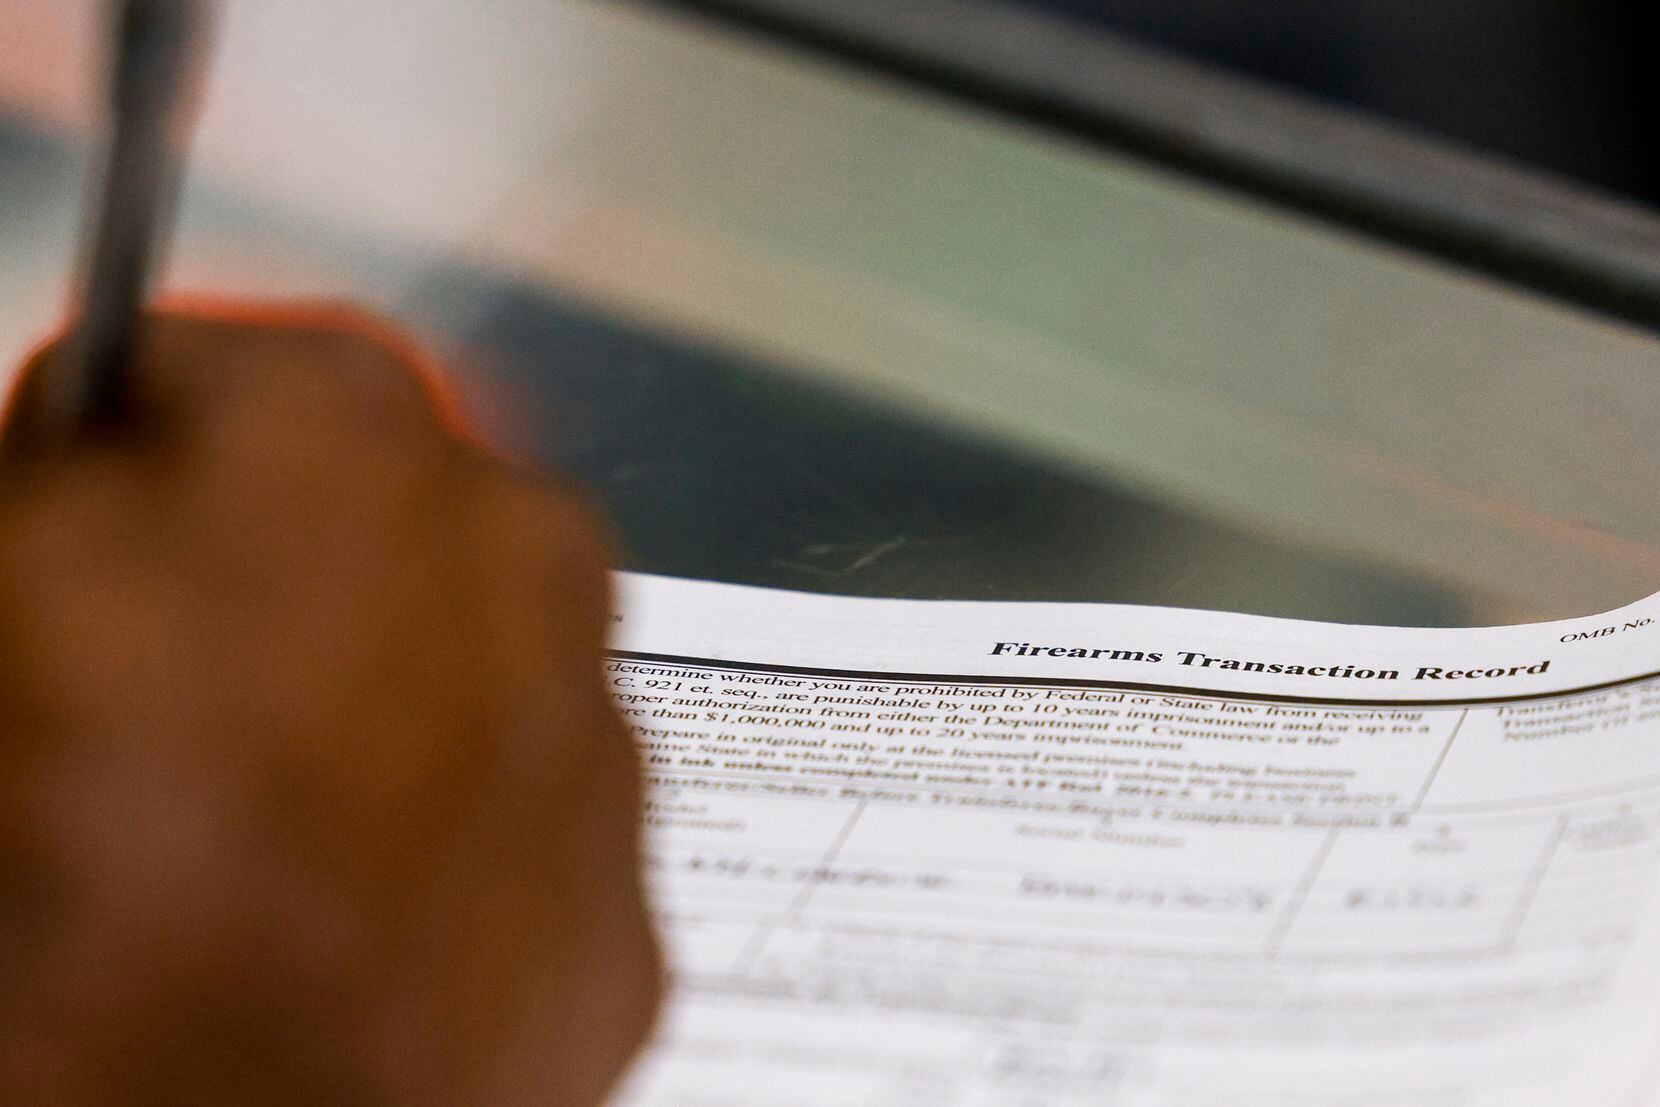 Brian Benford, 31, fills out ATF Form 4473, known as the Firearms Transaction Record, at...